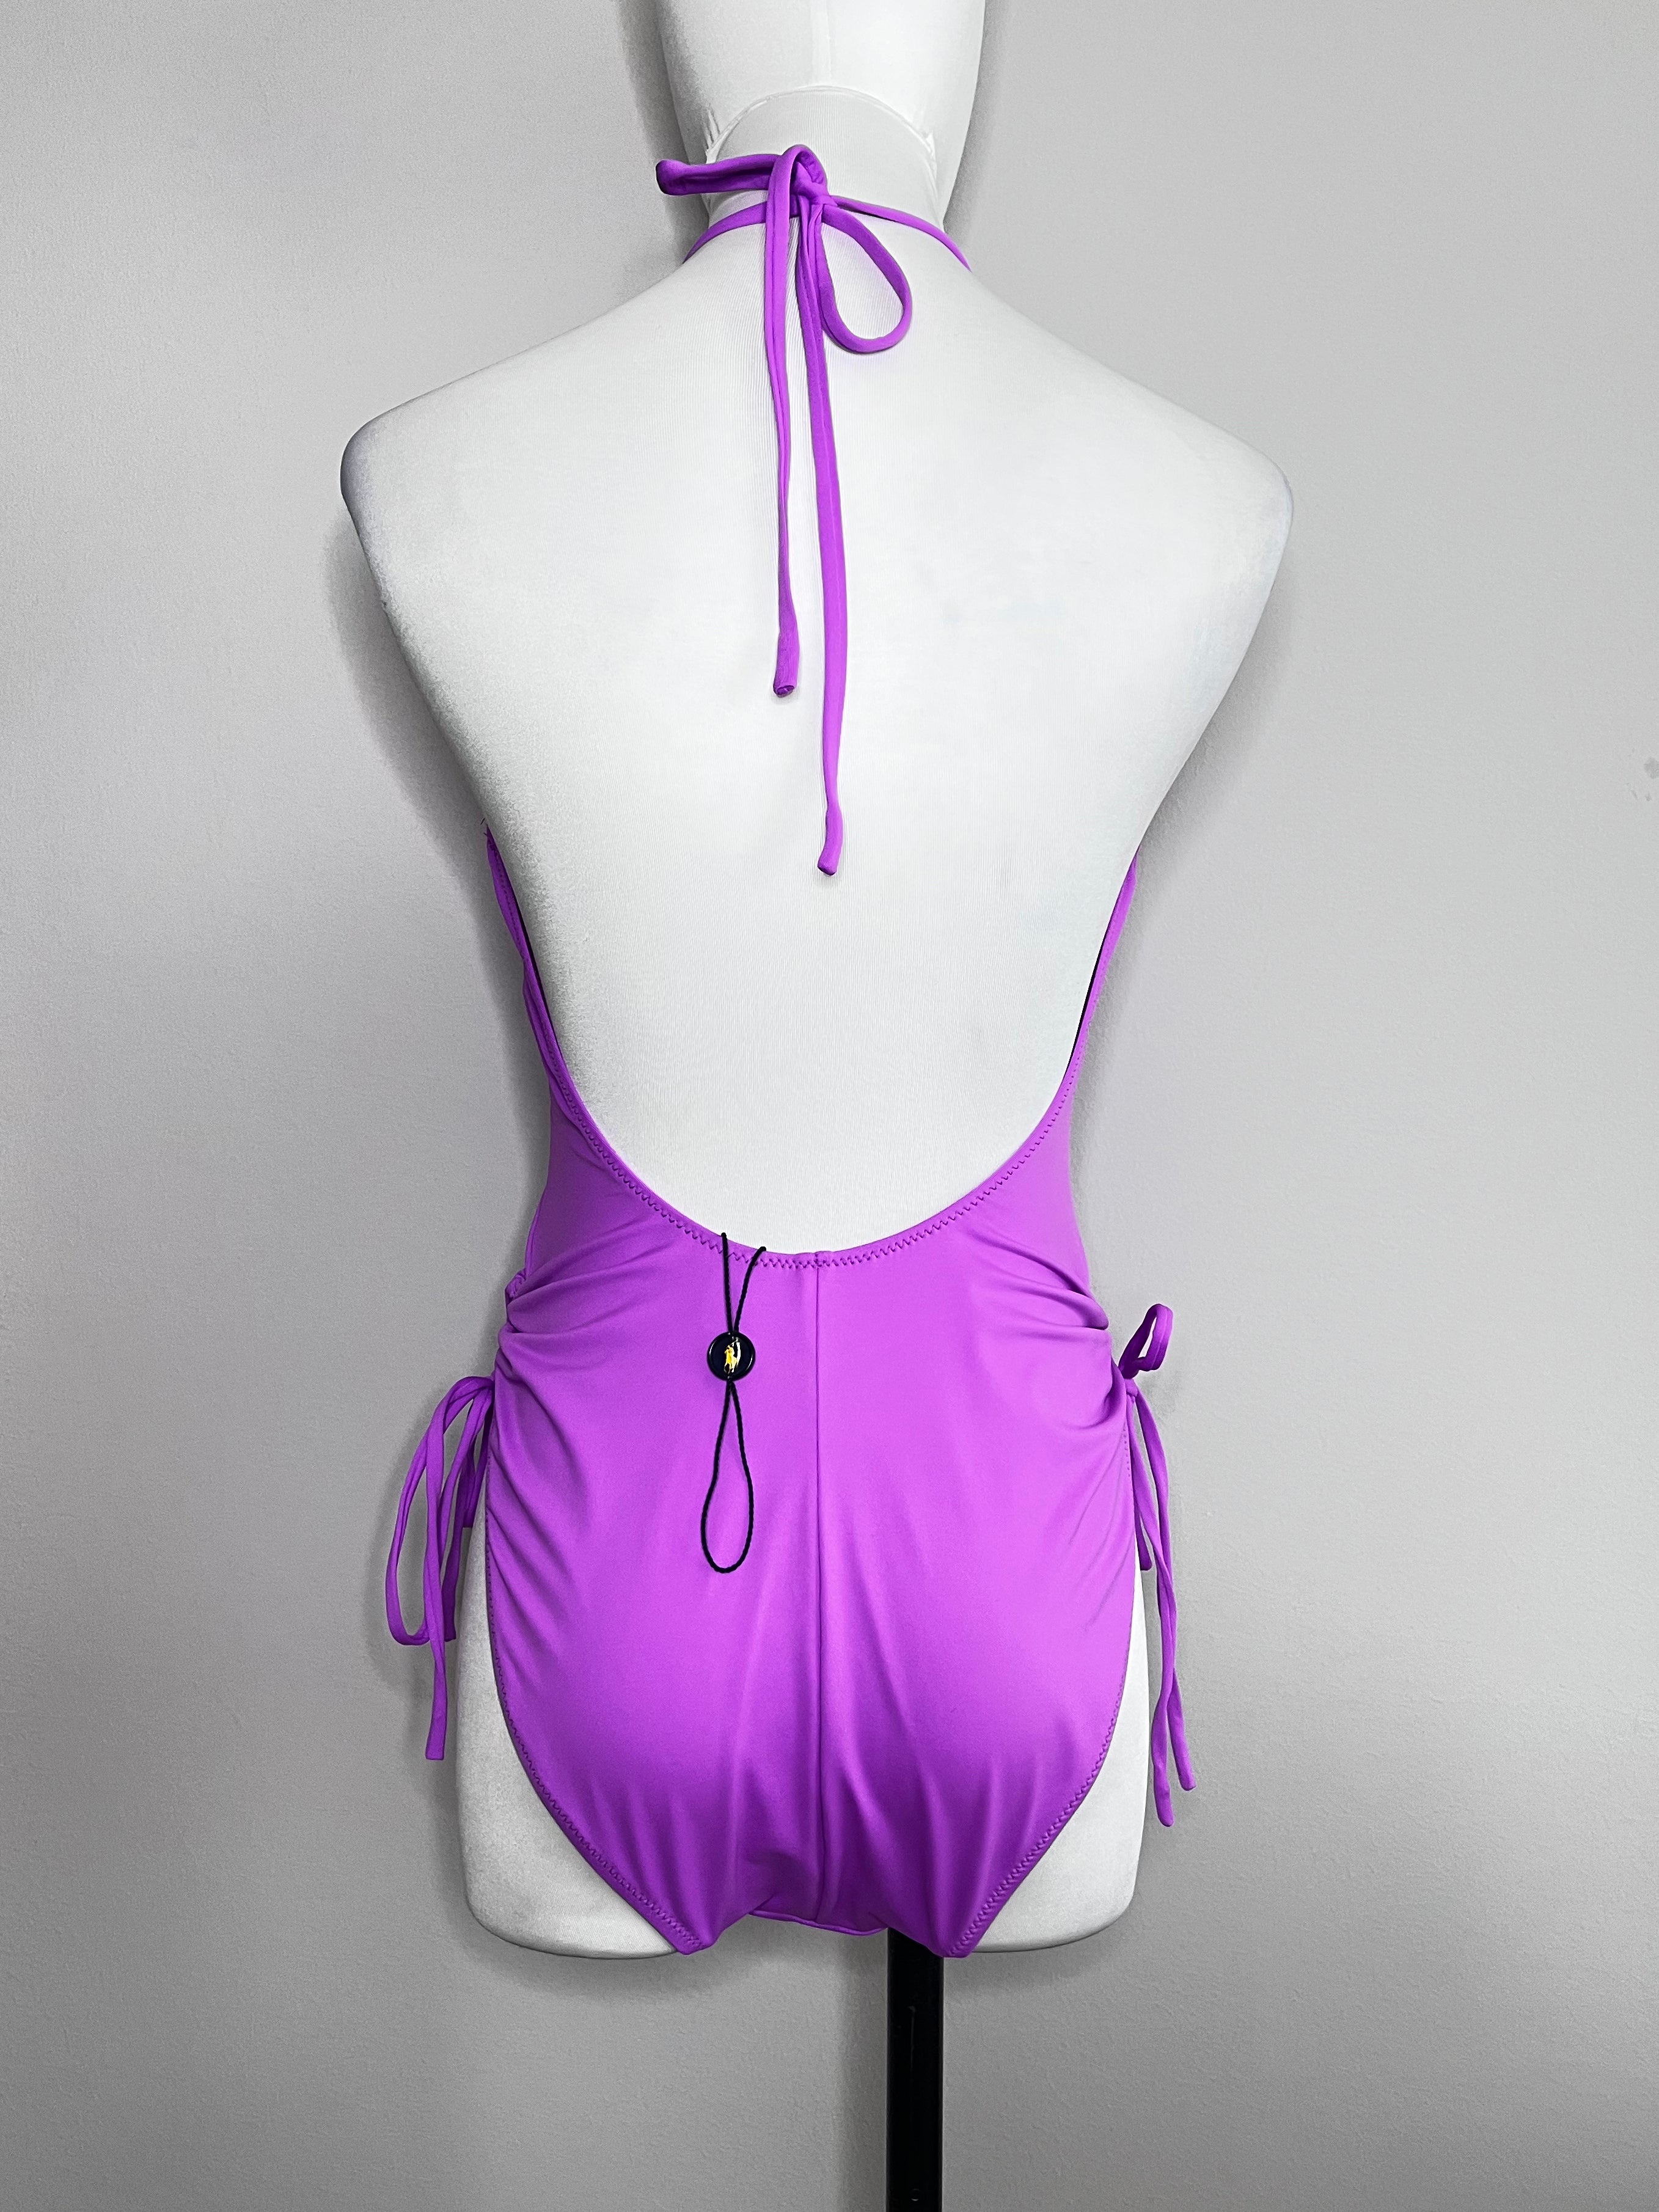 Brand new Purple with embroided logo and ruched details sleevless one piece swimsuit - POLO RALPH LAUREN